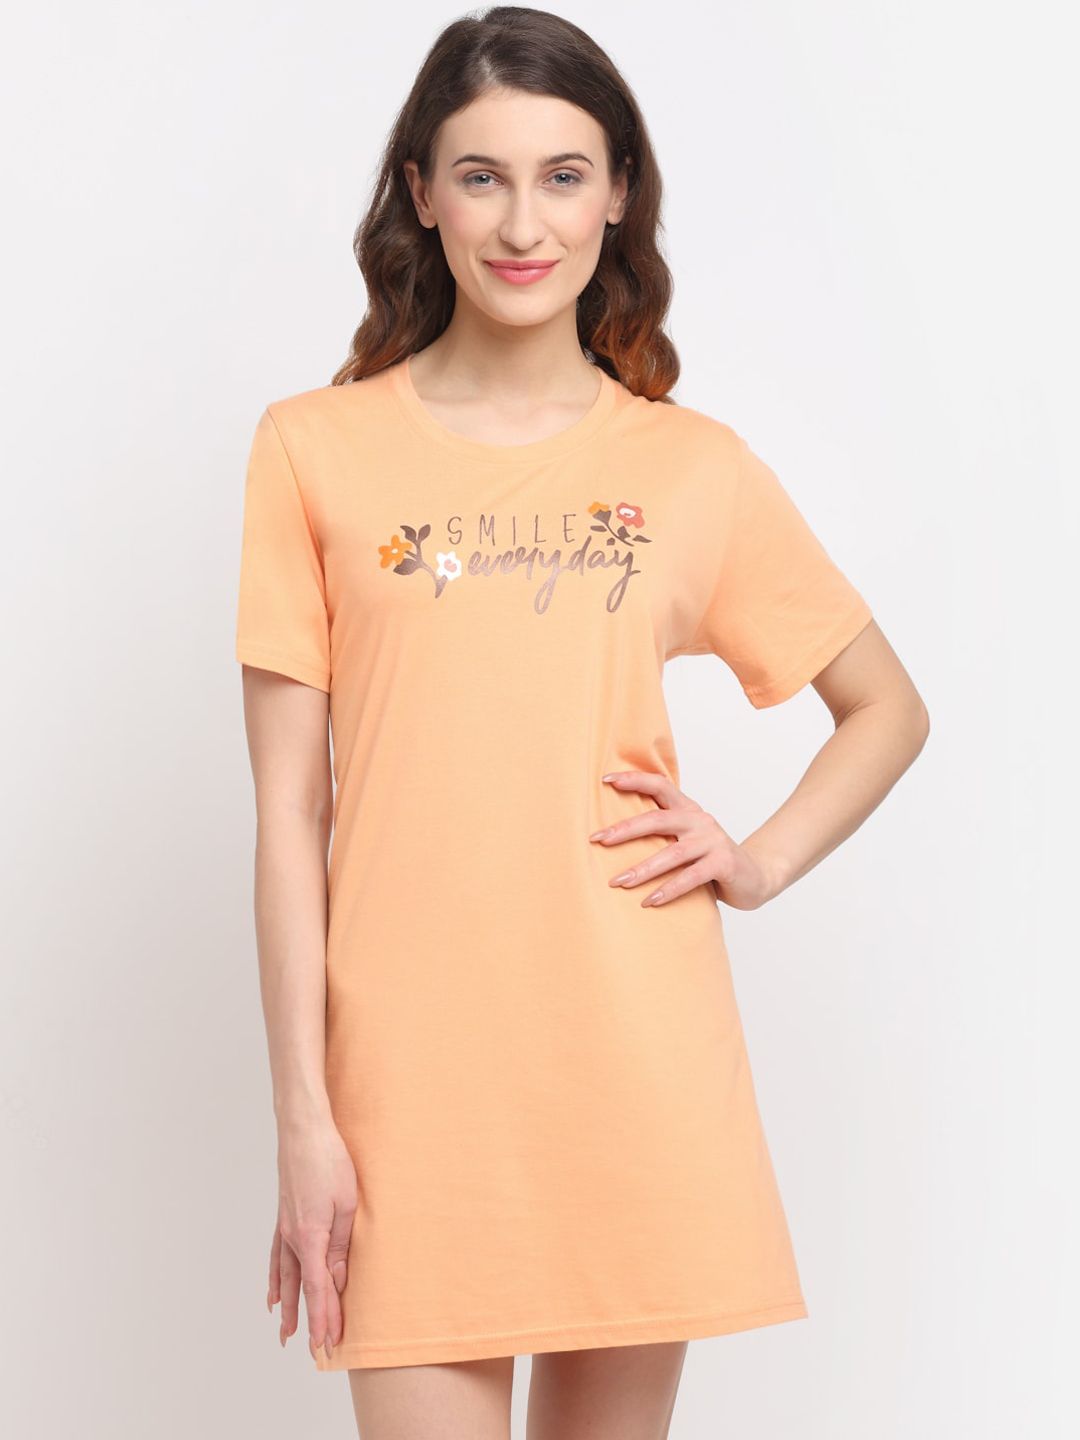 Kanvin Peach-Coloured Printed Lounge T-Shirt Price in India